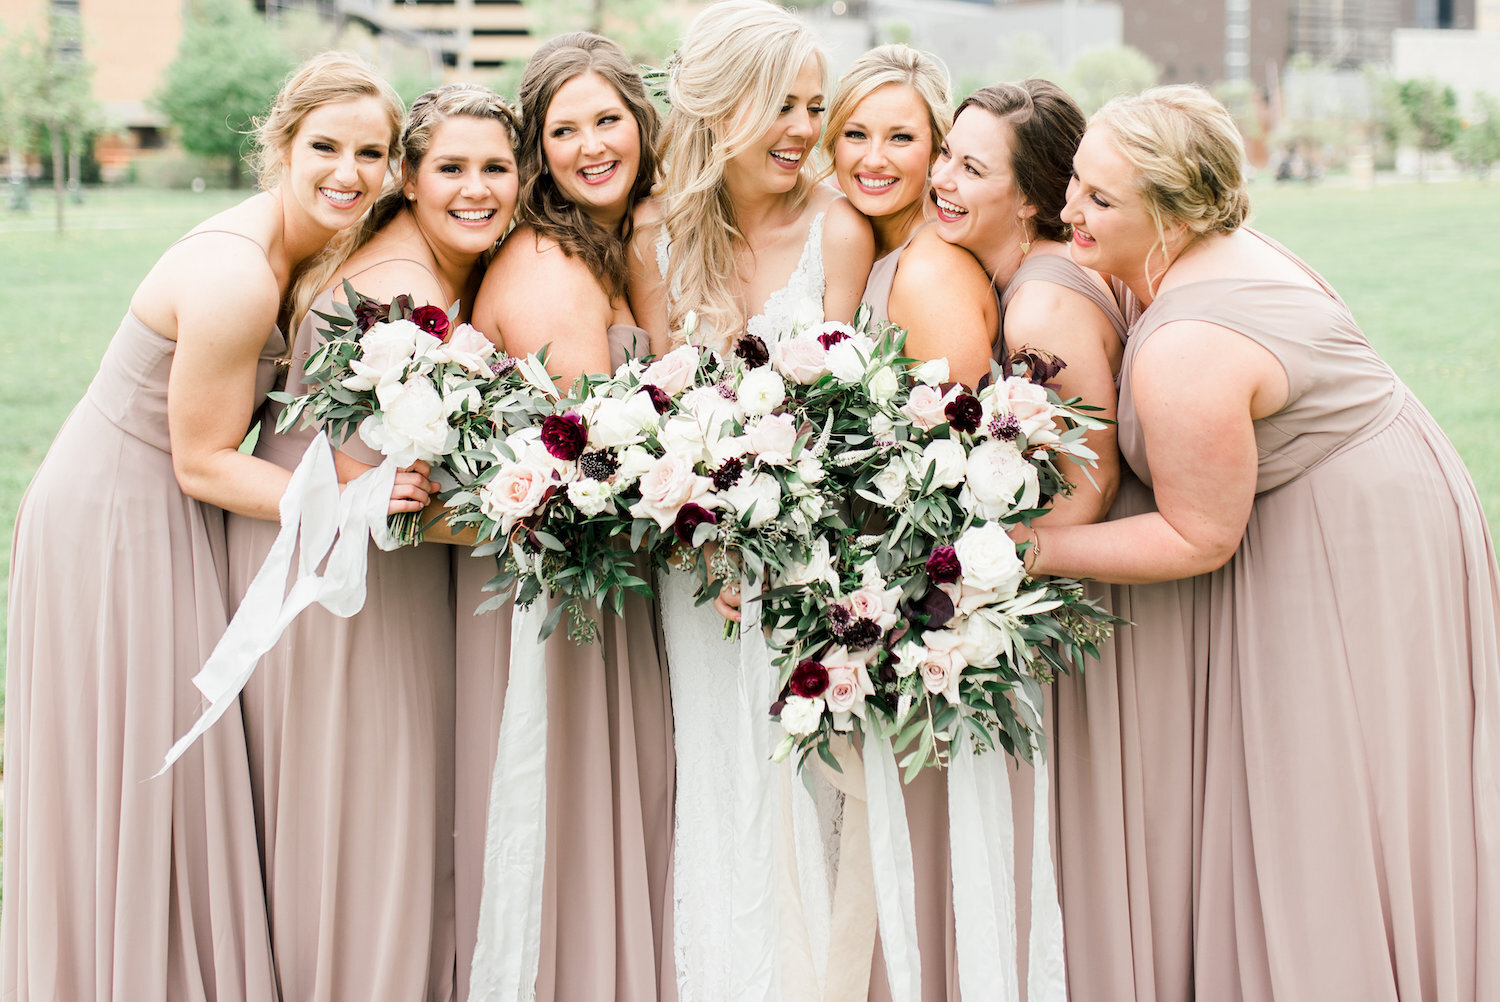 12 Wedding Party Bridesmaids Bouquets Maid of Honor.jpg